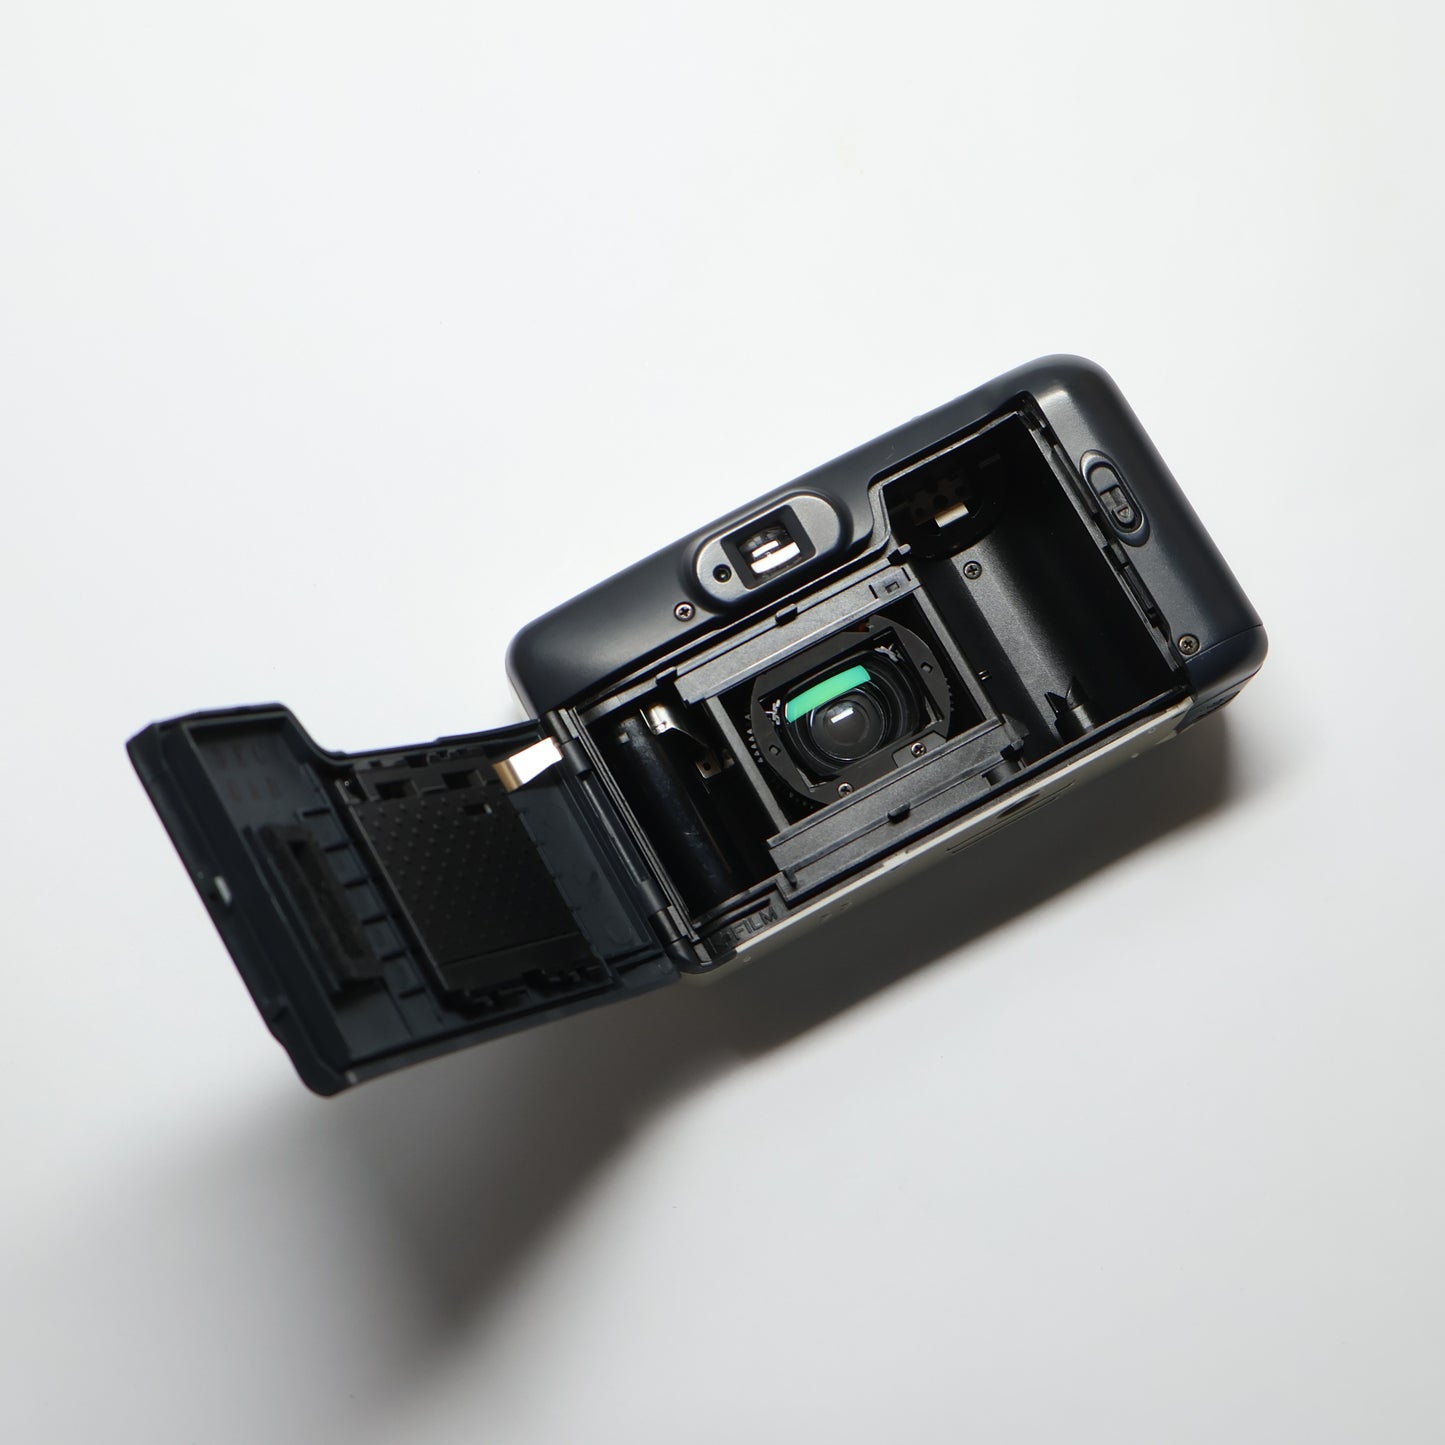 Yashica Zoomate 70Z